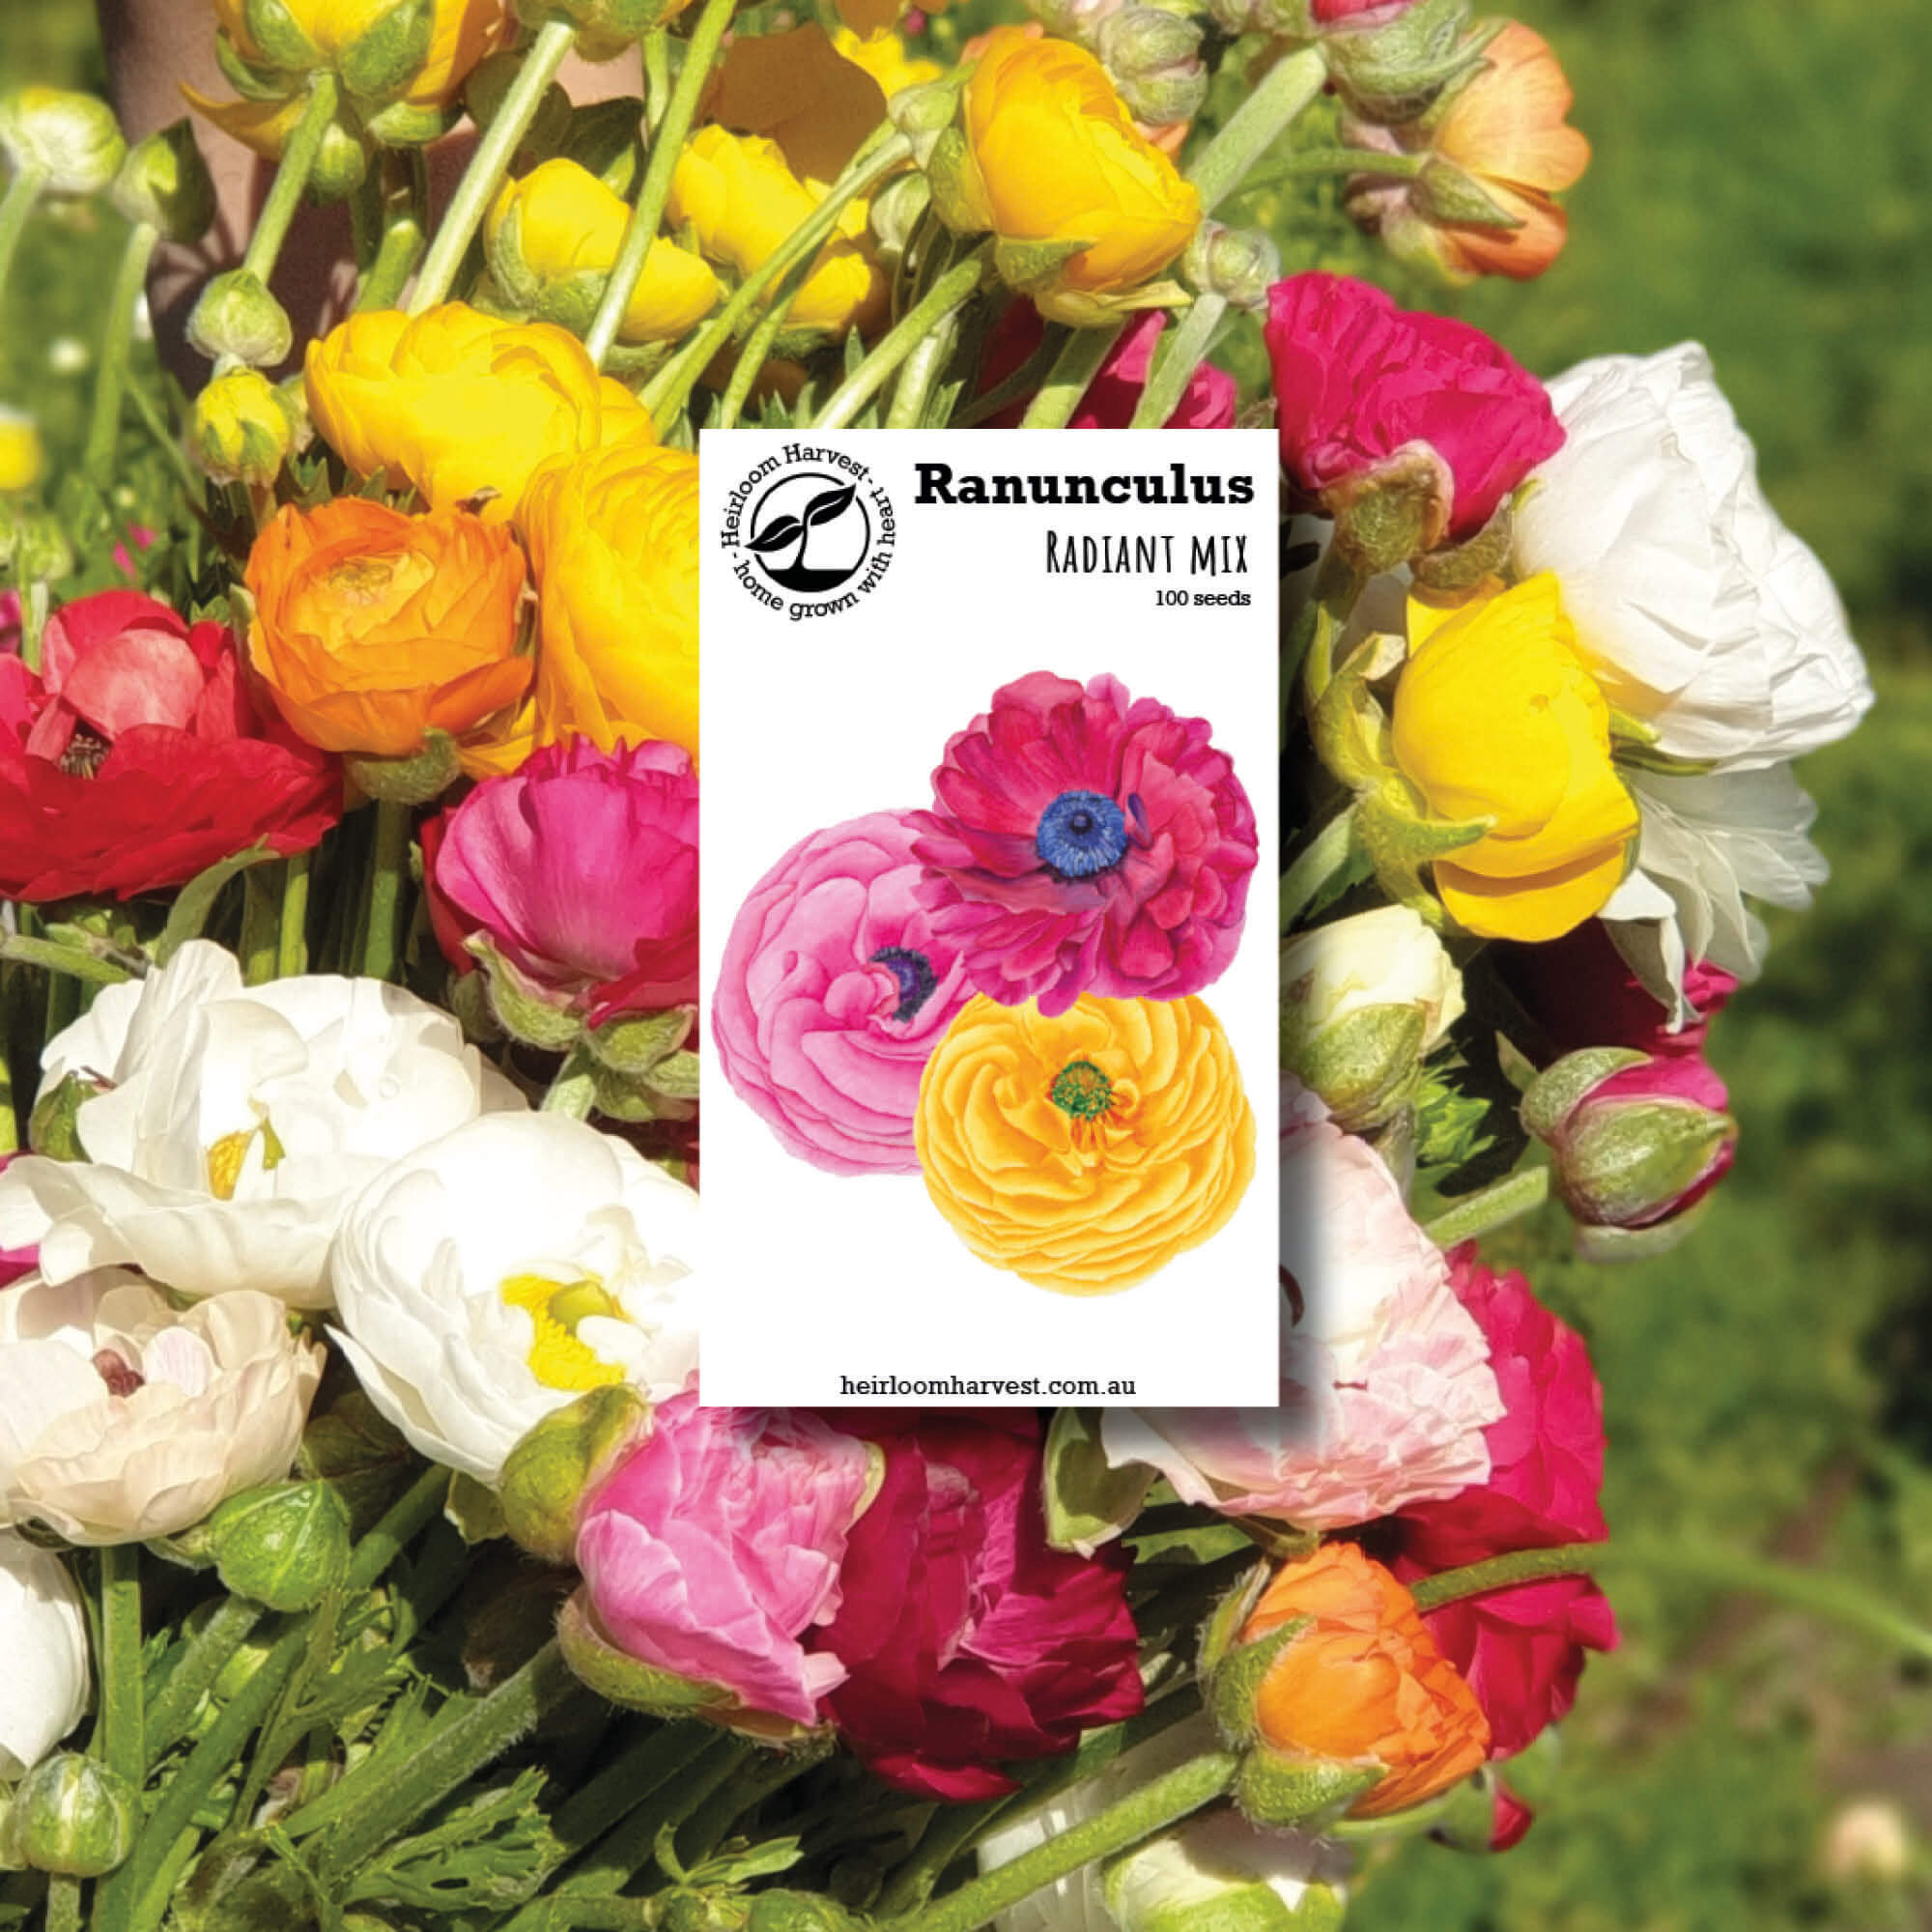 Ranunculus Organic flower seeds made by Heirloom Harvest in Australia from Your Wild Books